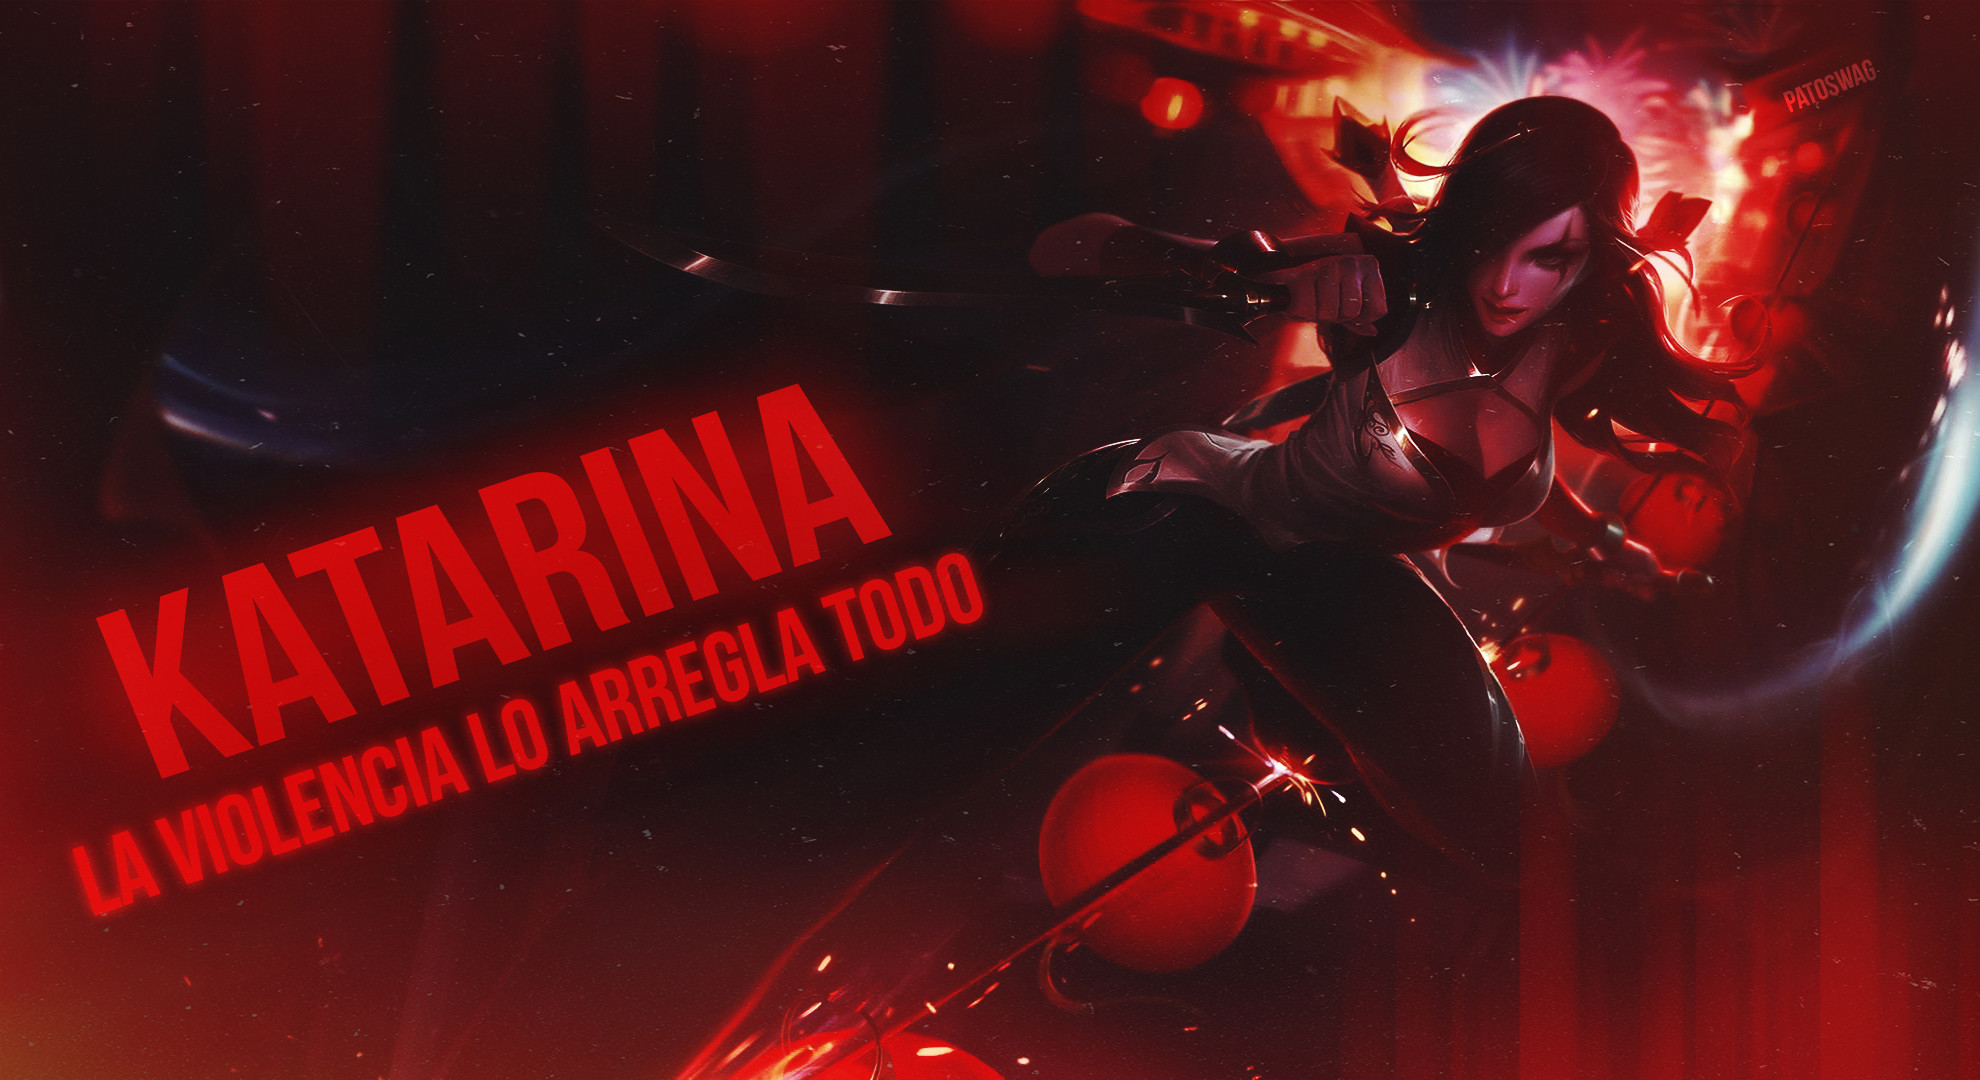 1980x1080 ... Katarina ~ Wallpaper 2 ~ League of legend by PatoSwag